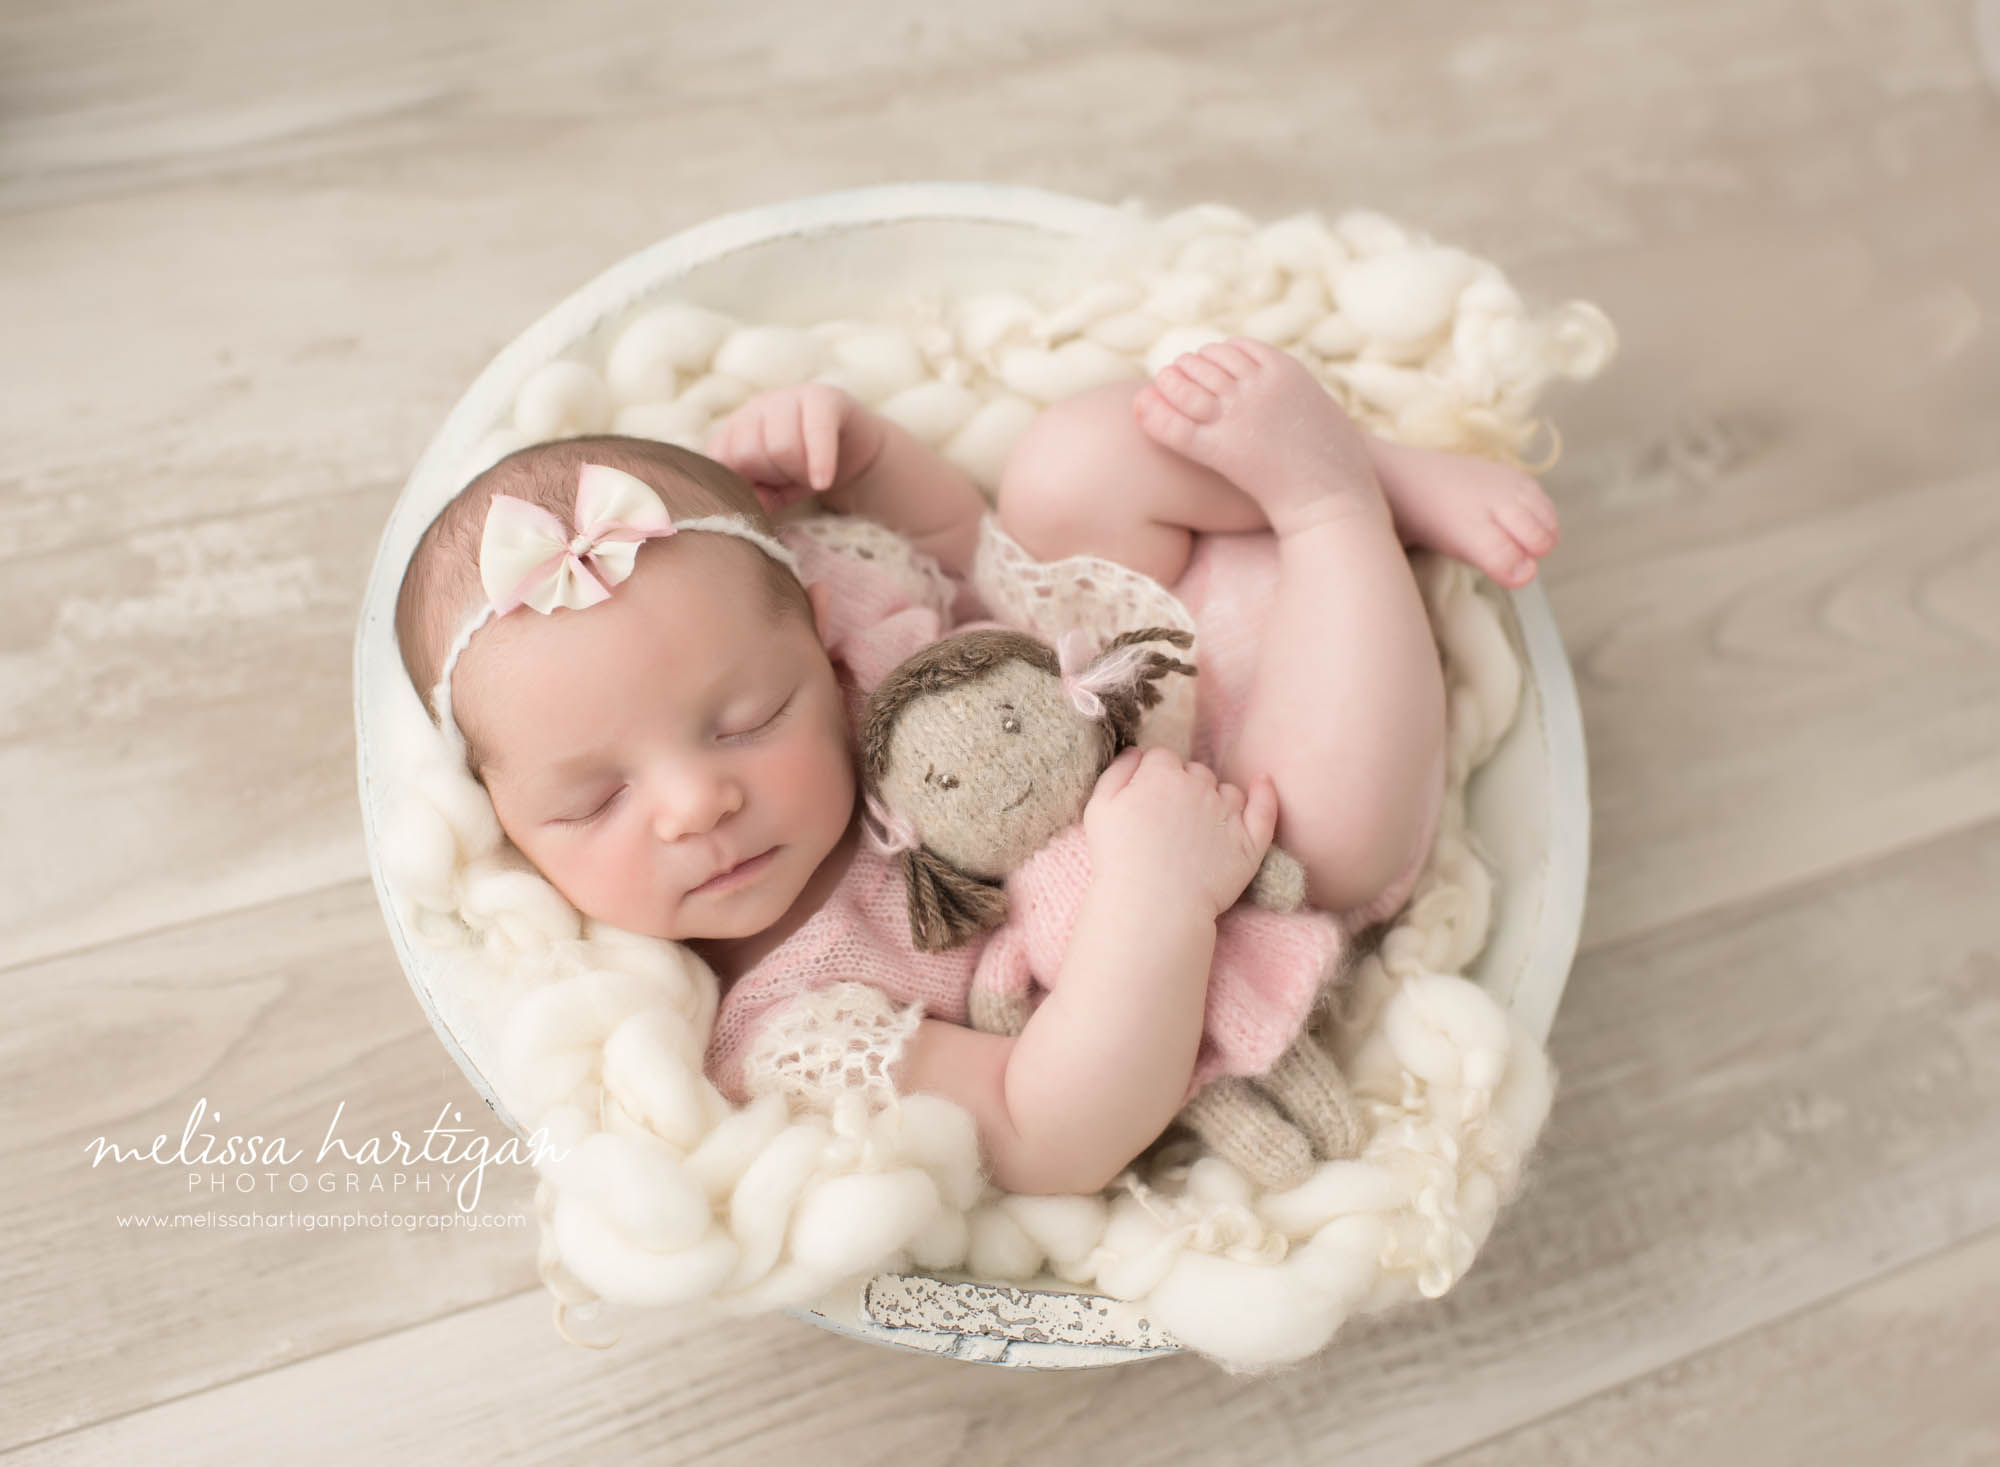 Connecticut Newborn Photographer baby holding doll sleeping in bowl